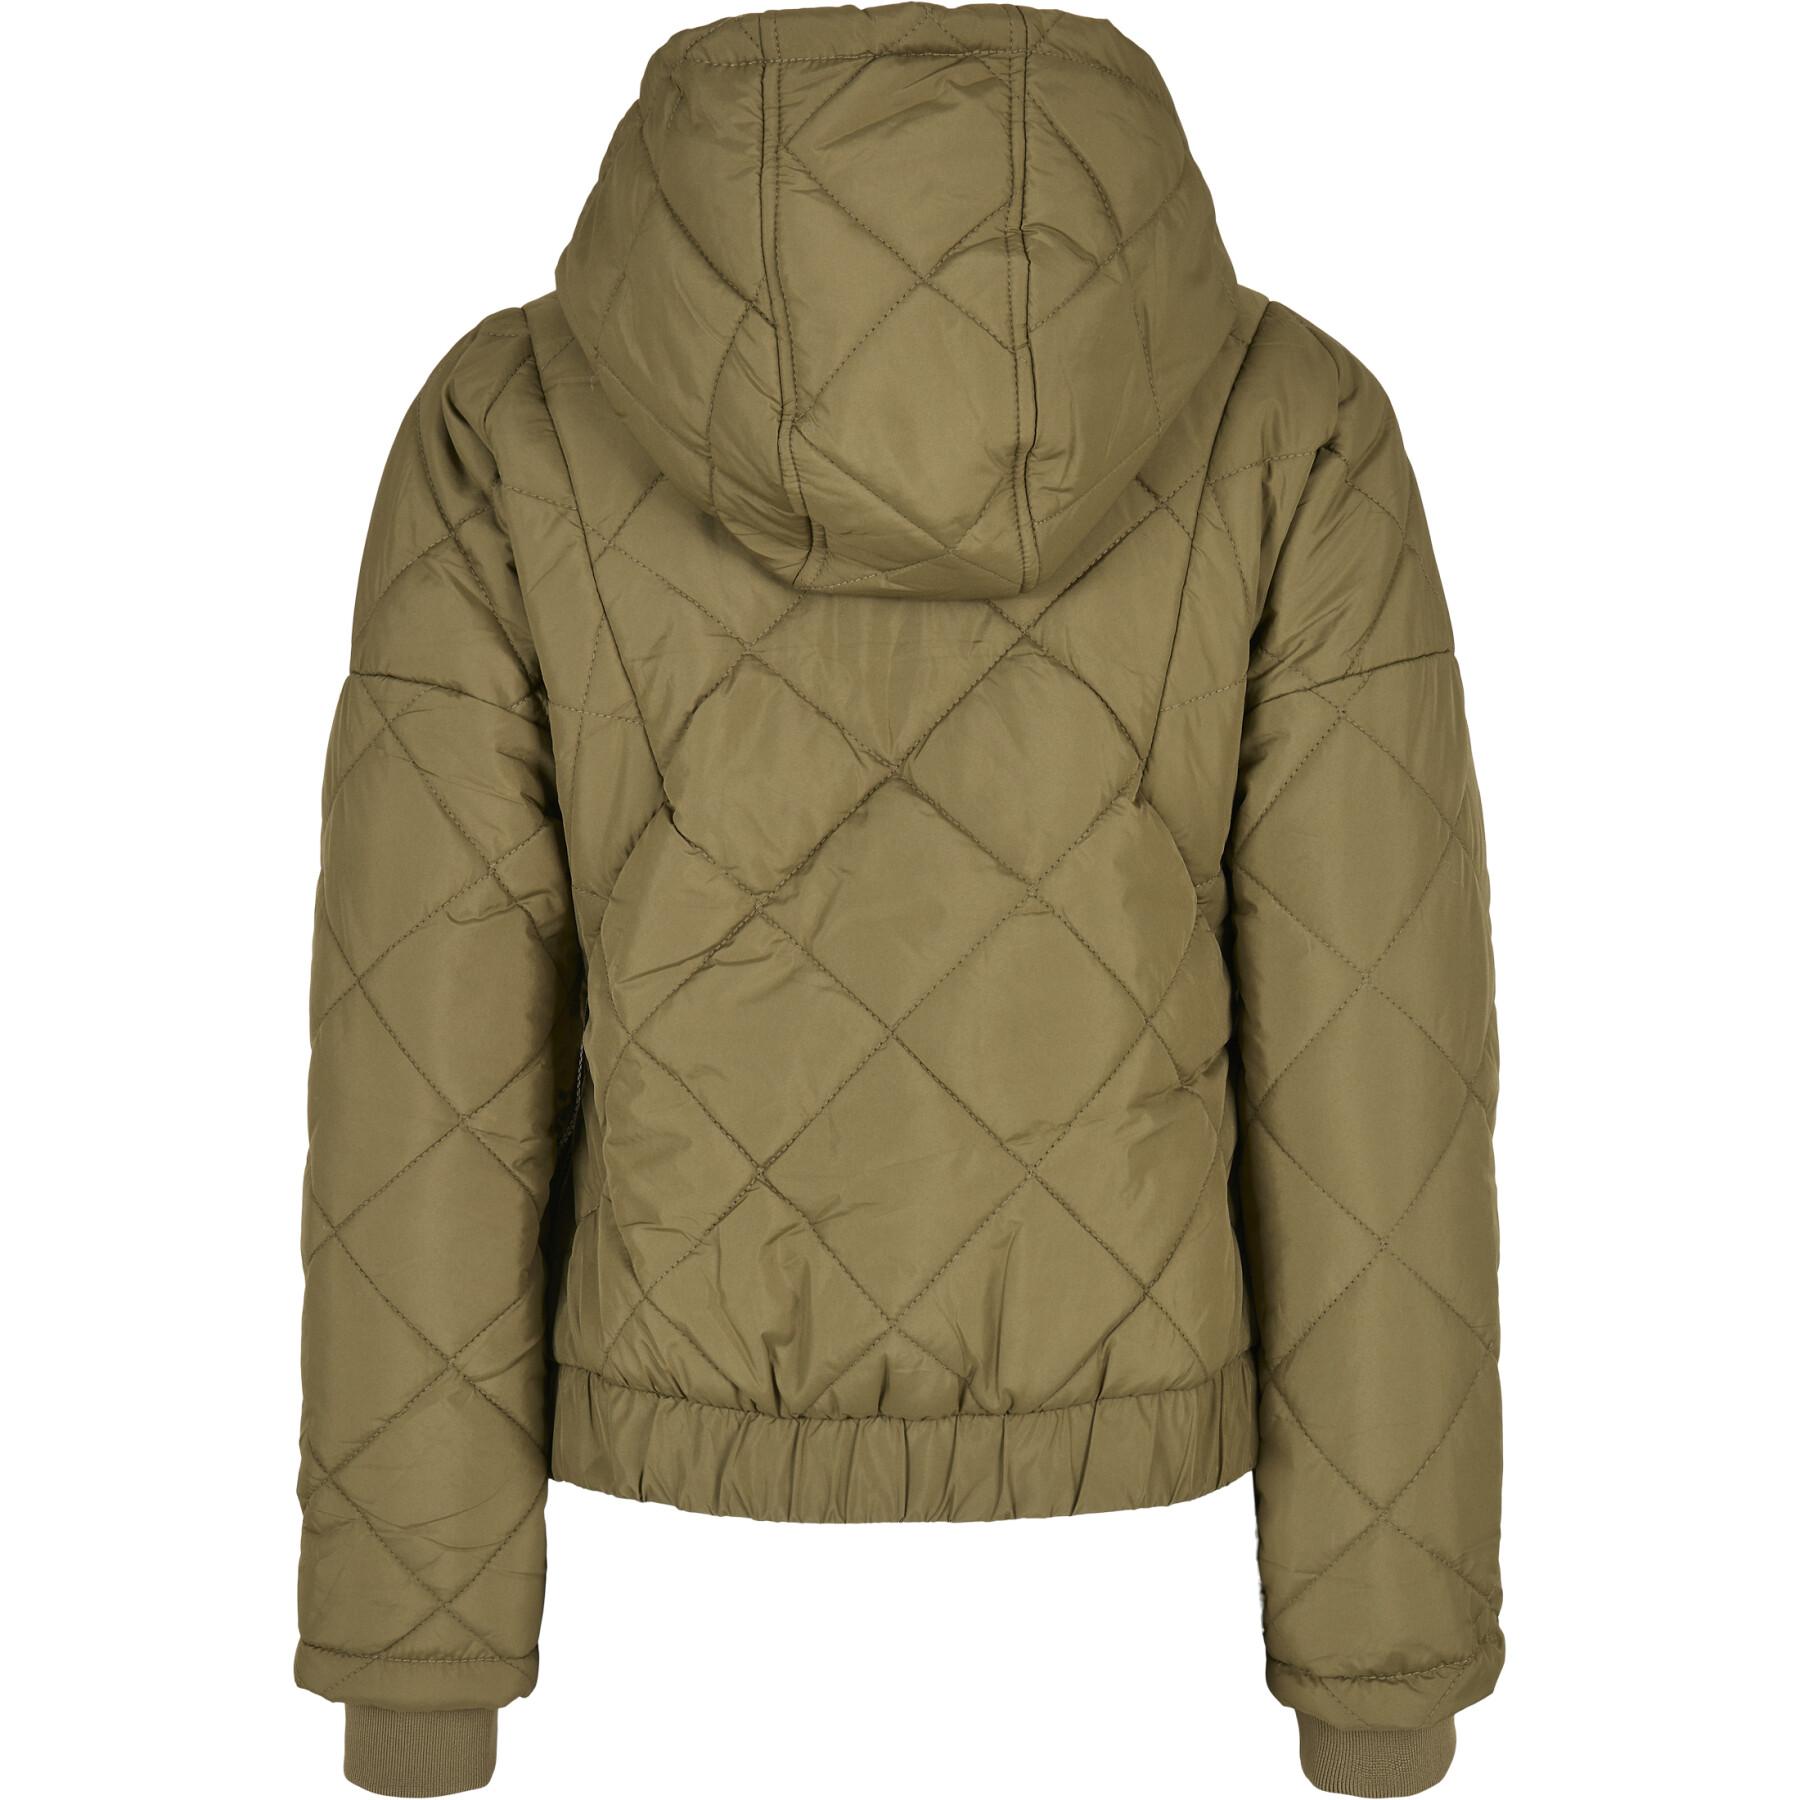 Puffer Jacket Urban Classics oversized diamondQuilted  pull over